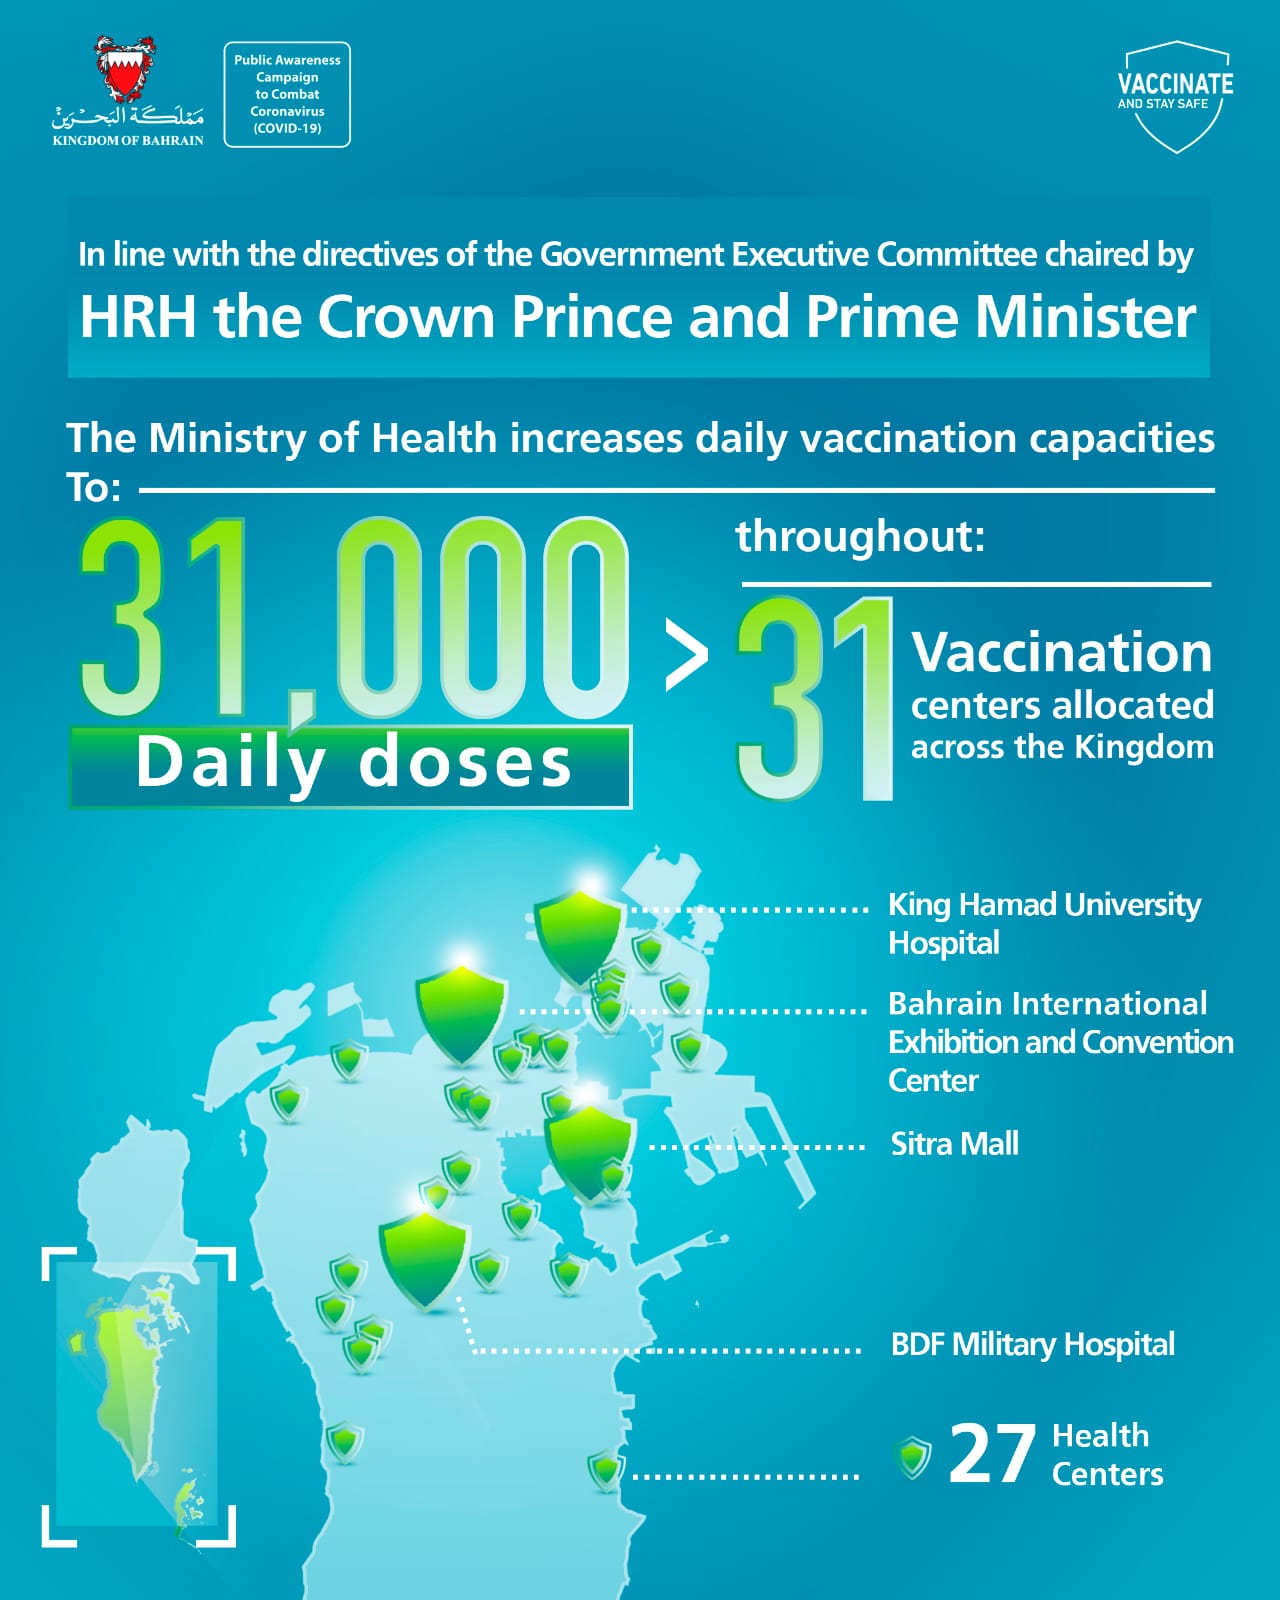 The Ministry of Health increases daily vaccination capacity to 31,000 doses at 31 health centers across the Kingdom